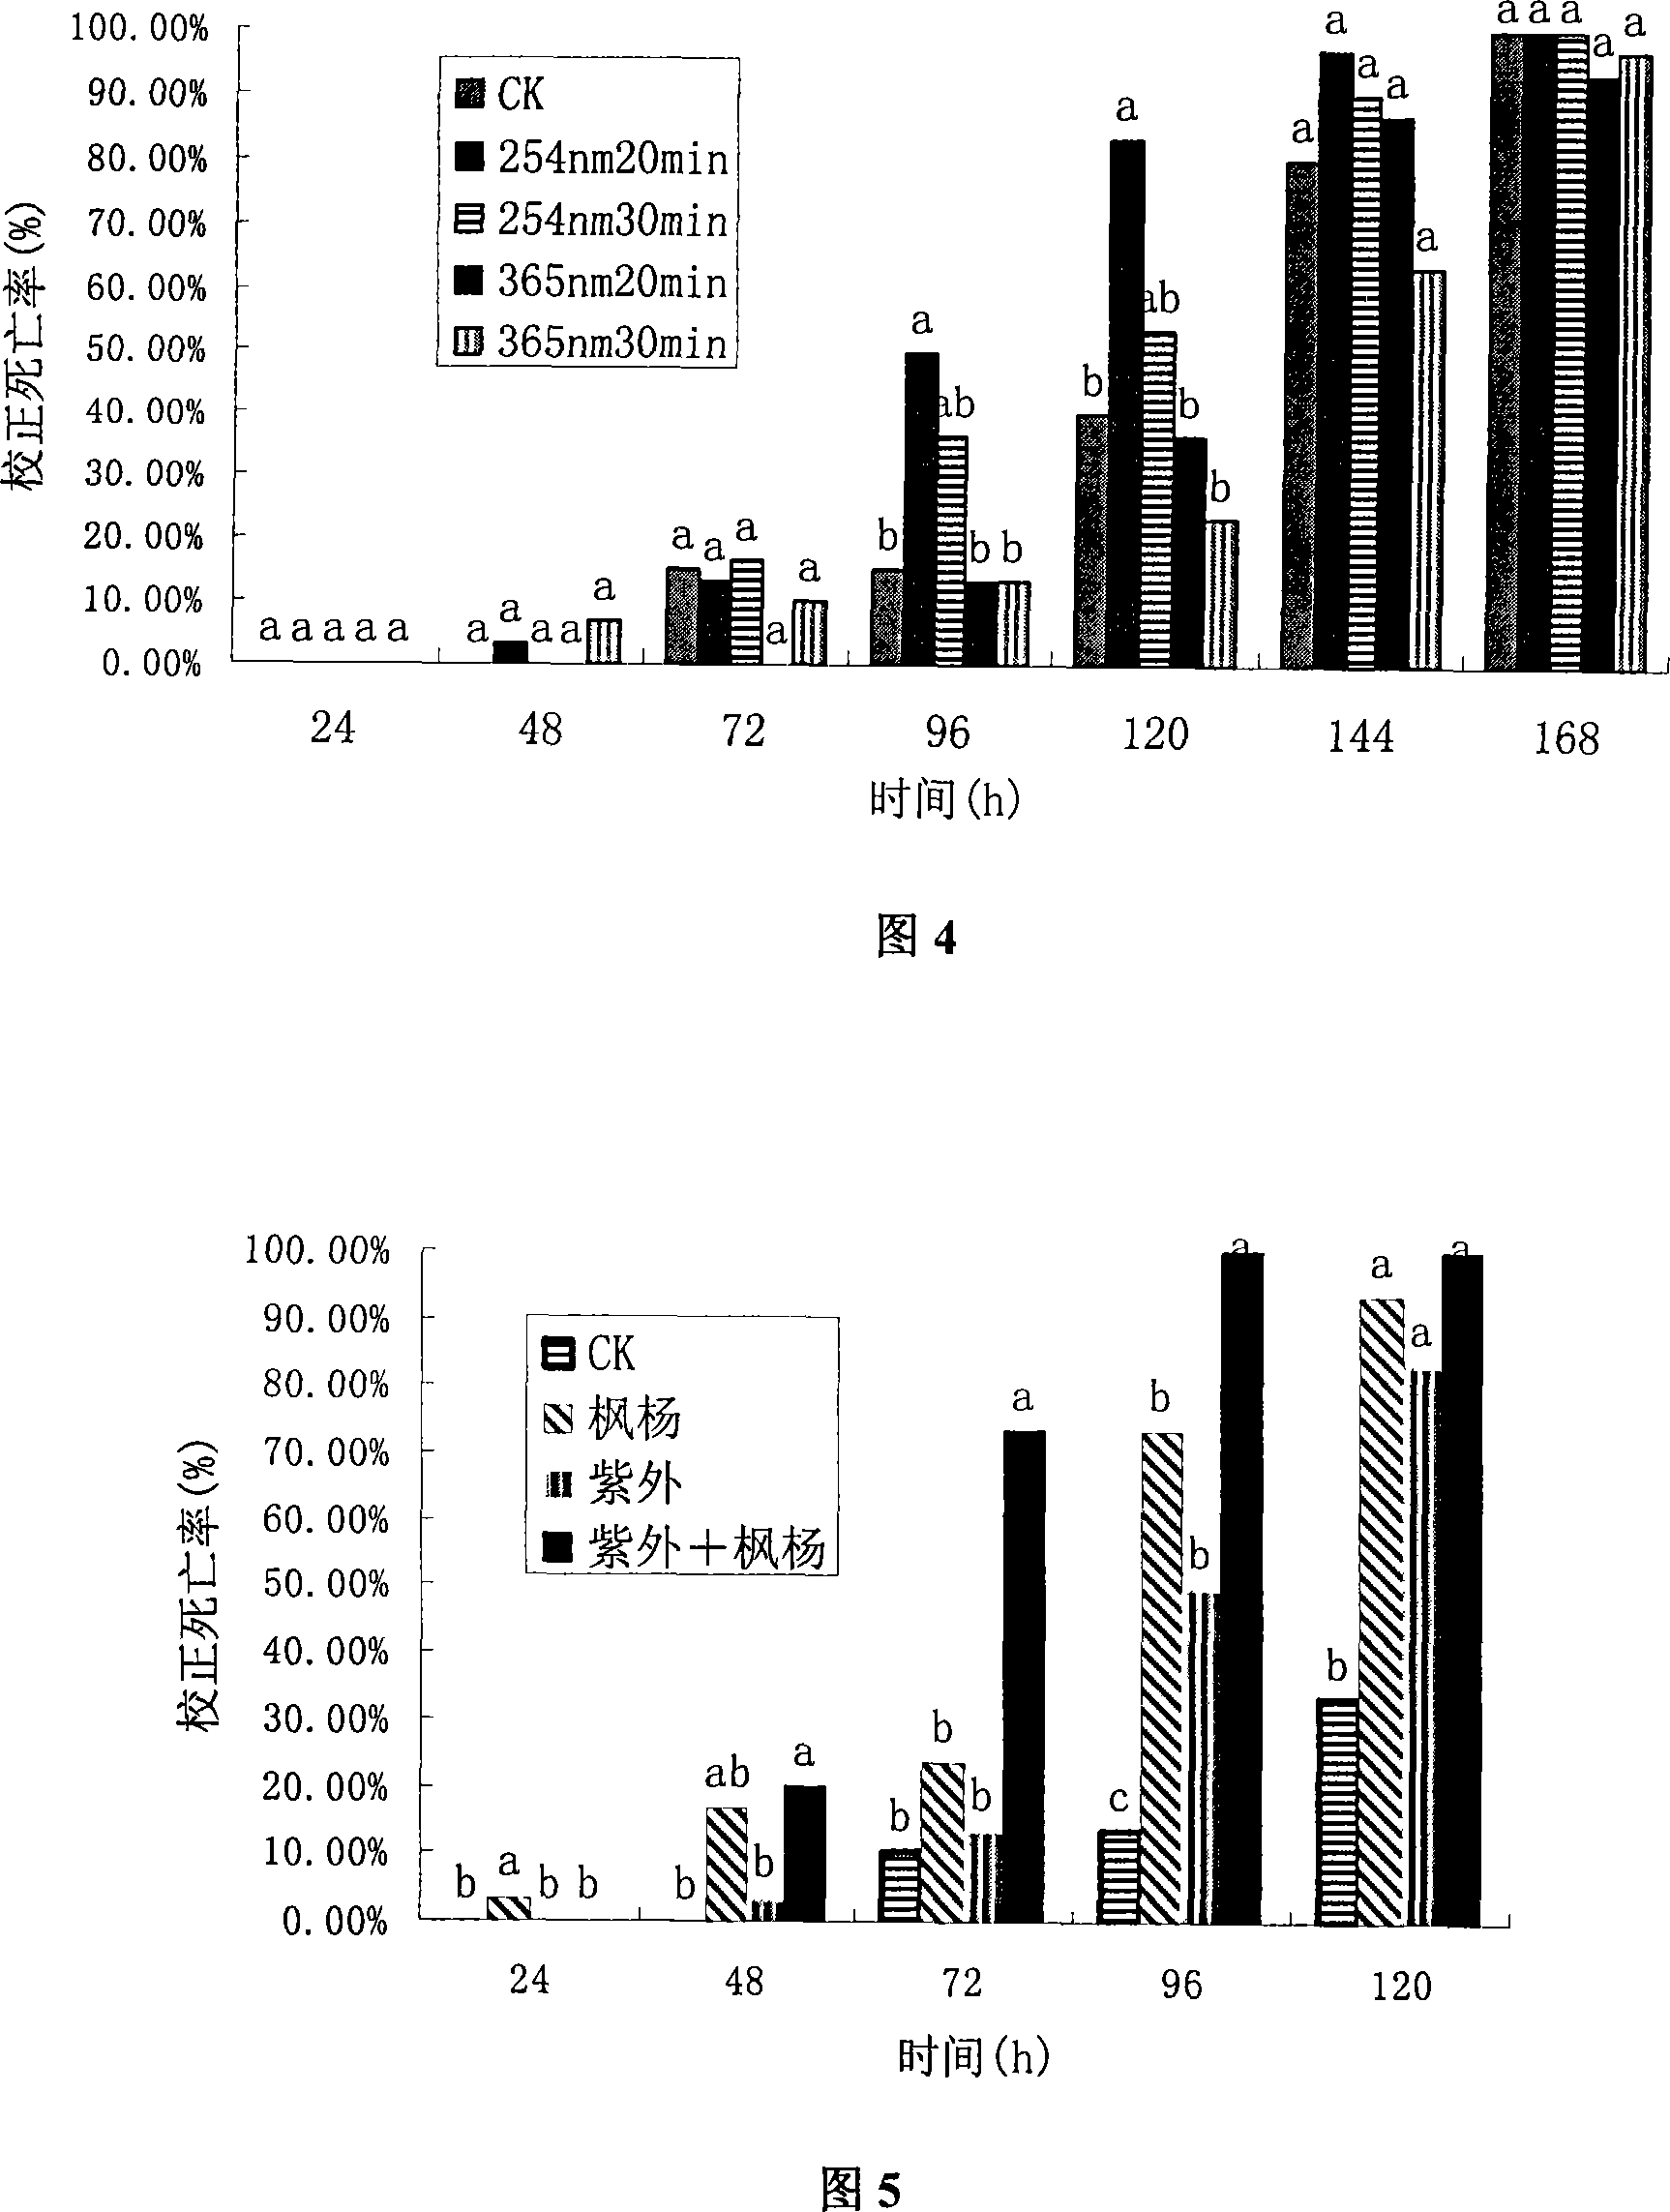 Method of non-chemical treatment for preventing and controlling insects of grain storage